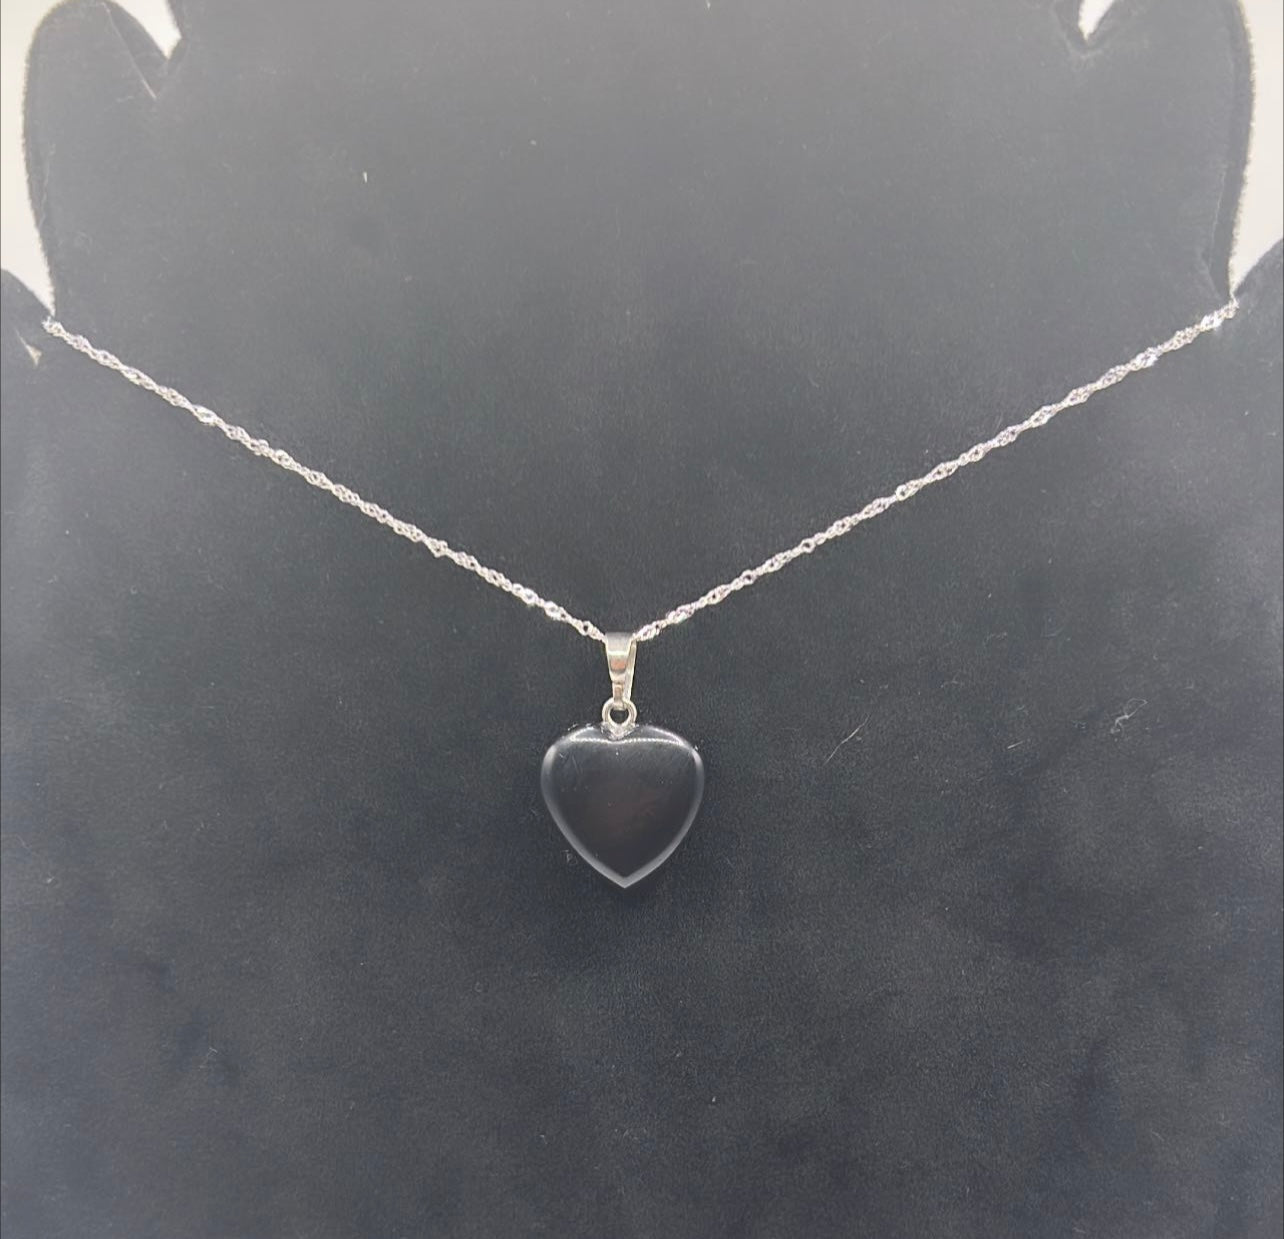 Small heart obsidian pendant w/sterling silver necklace